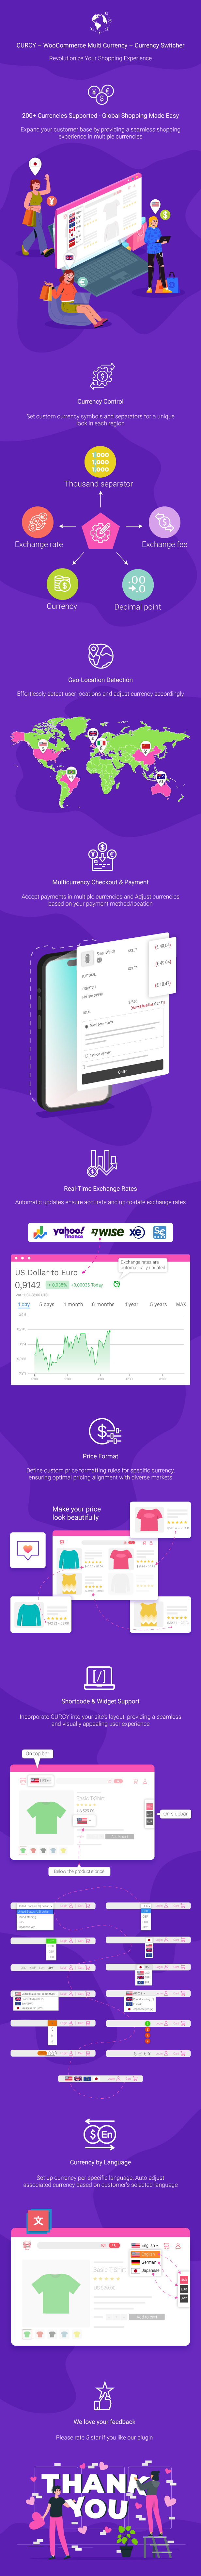 WooCommerce Multi Currencies Infographic